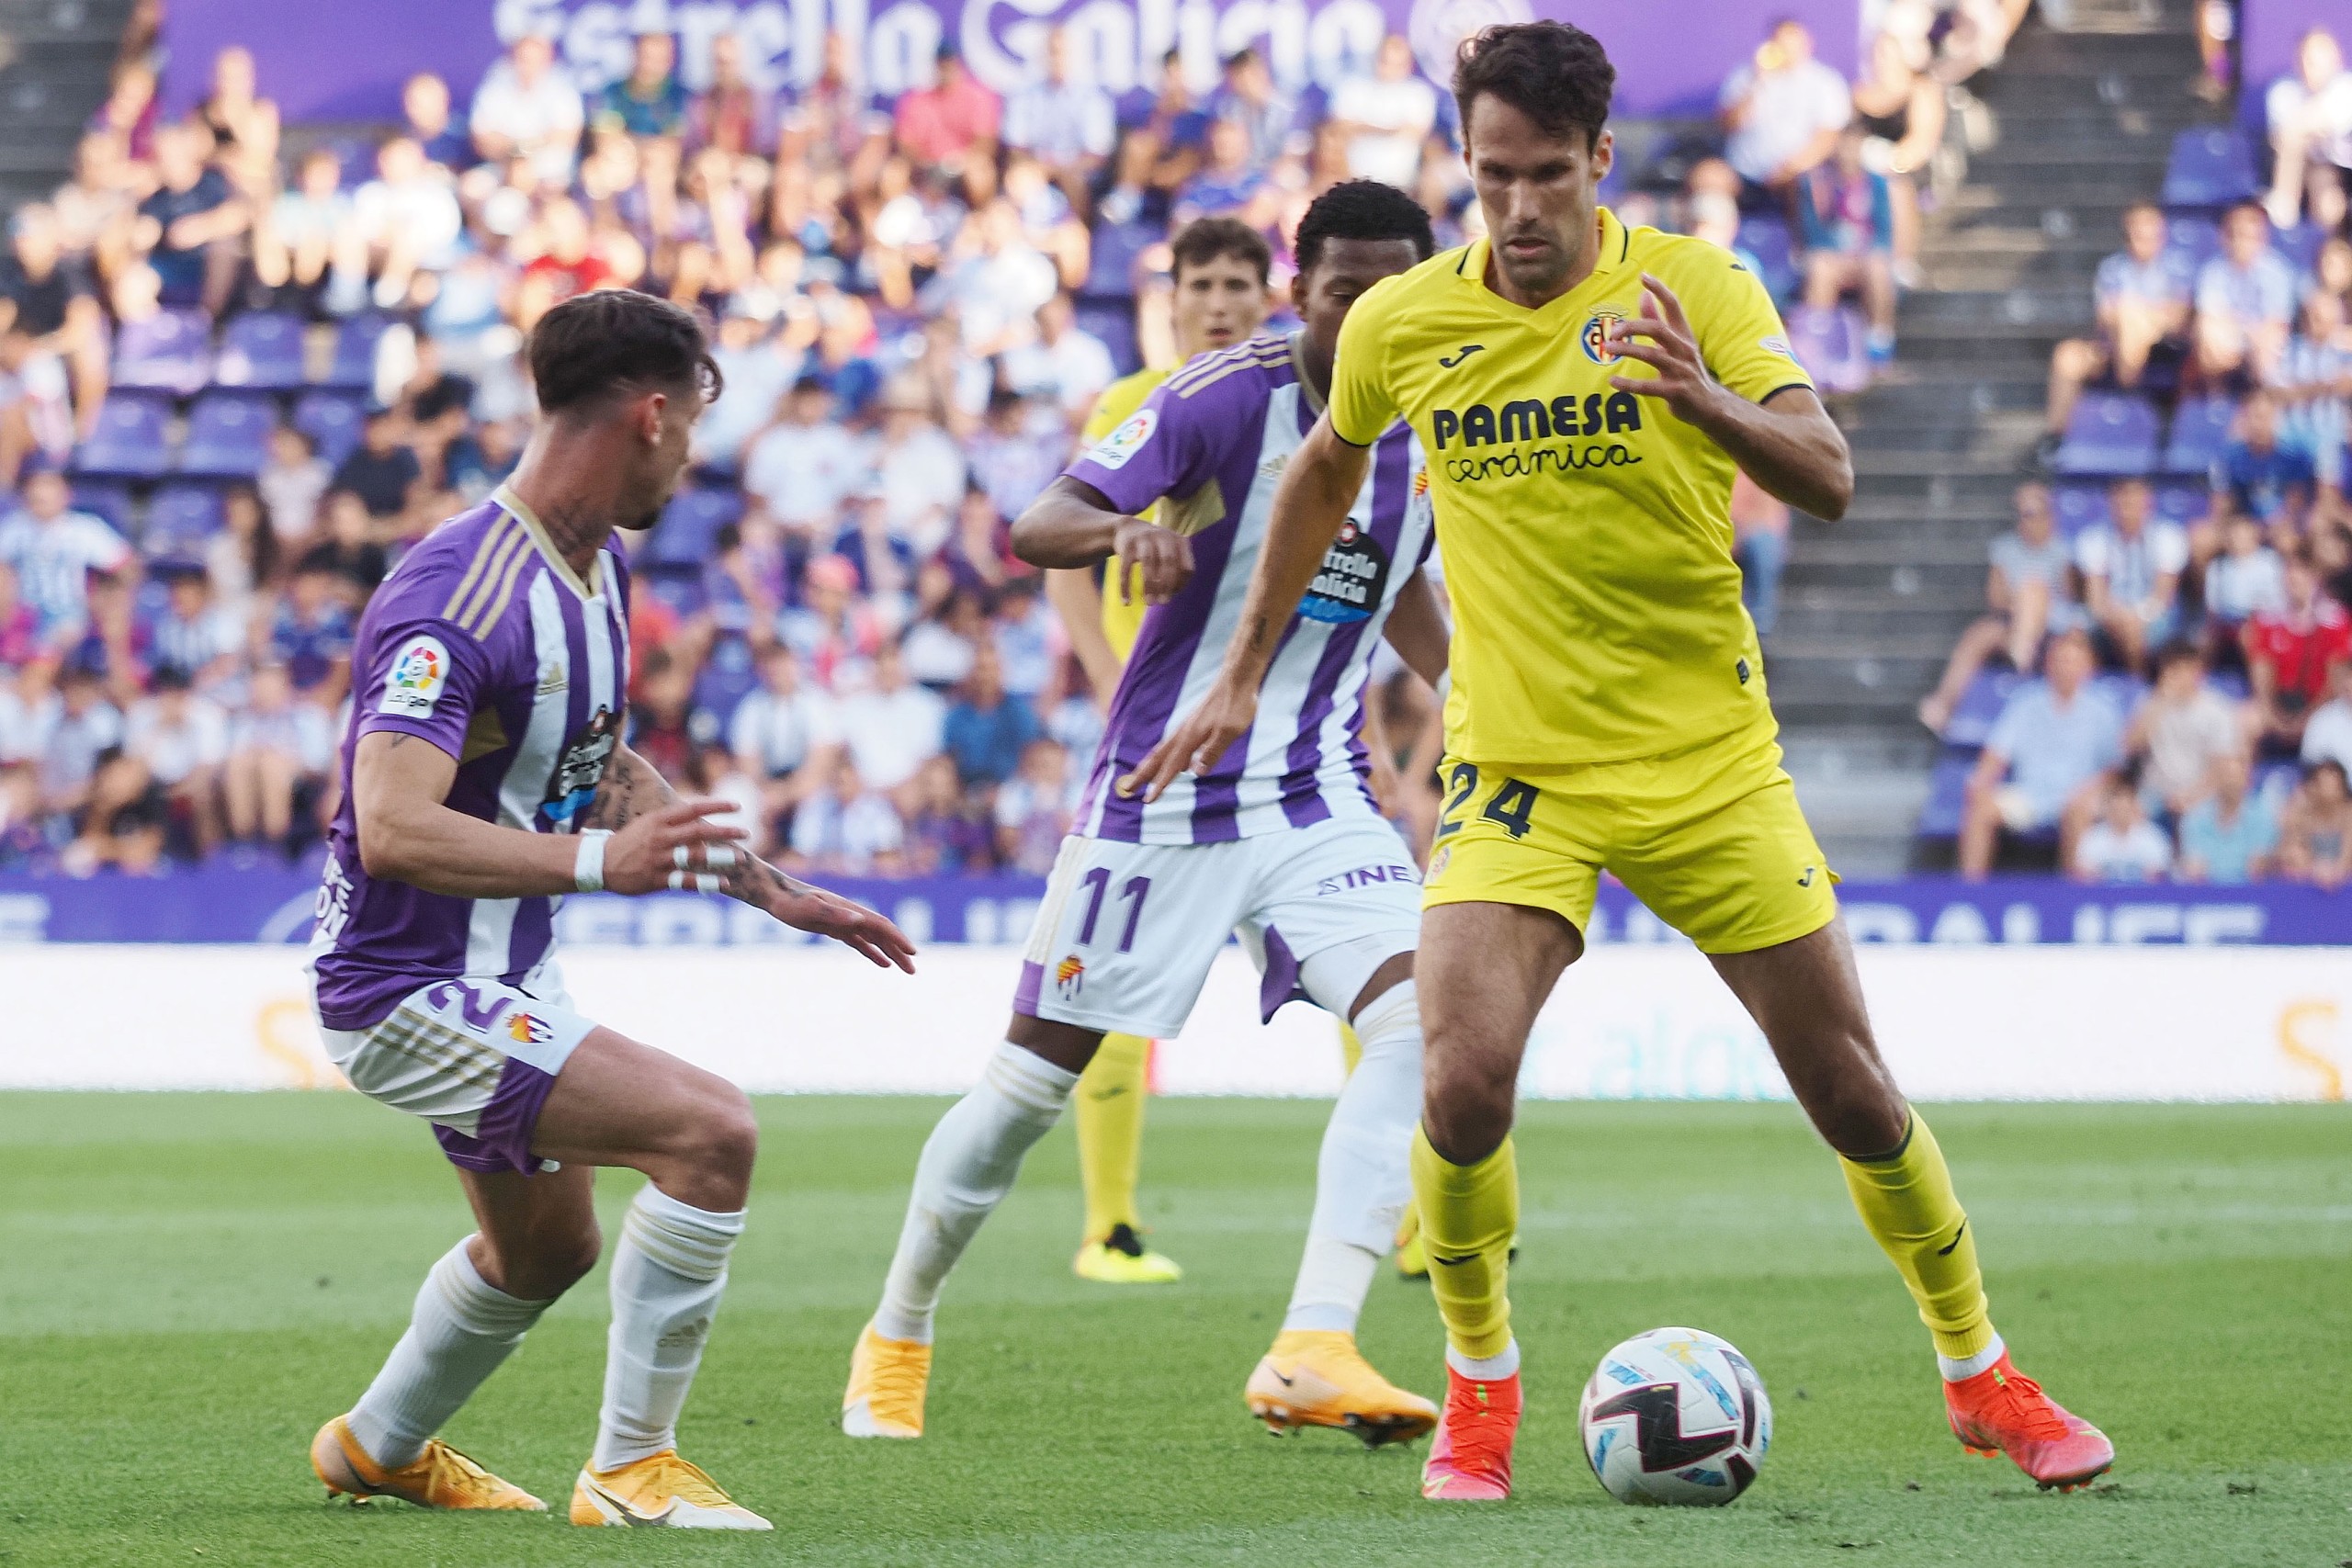 epa10119294 Valladolid's defender Luis Perez (L) in action against Villarreal's defender Alfonso Pedraza during the Spanish LaLiga soccer match between Valladolid CF and Villarreal CF at Jose Zorrilla stadium in Valladolid, Spain, 13 August 2022.  EPA/R. GARCIA